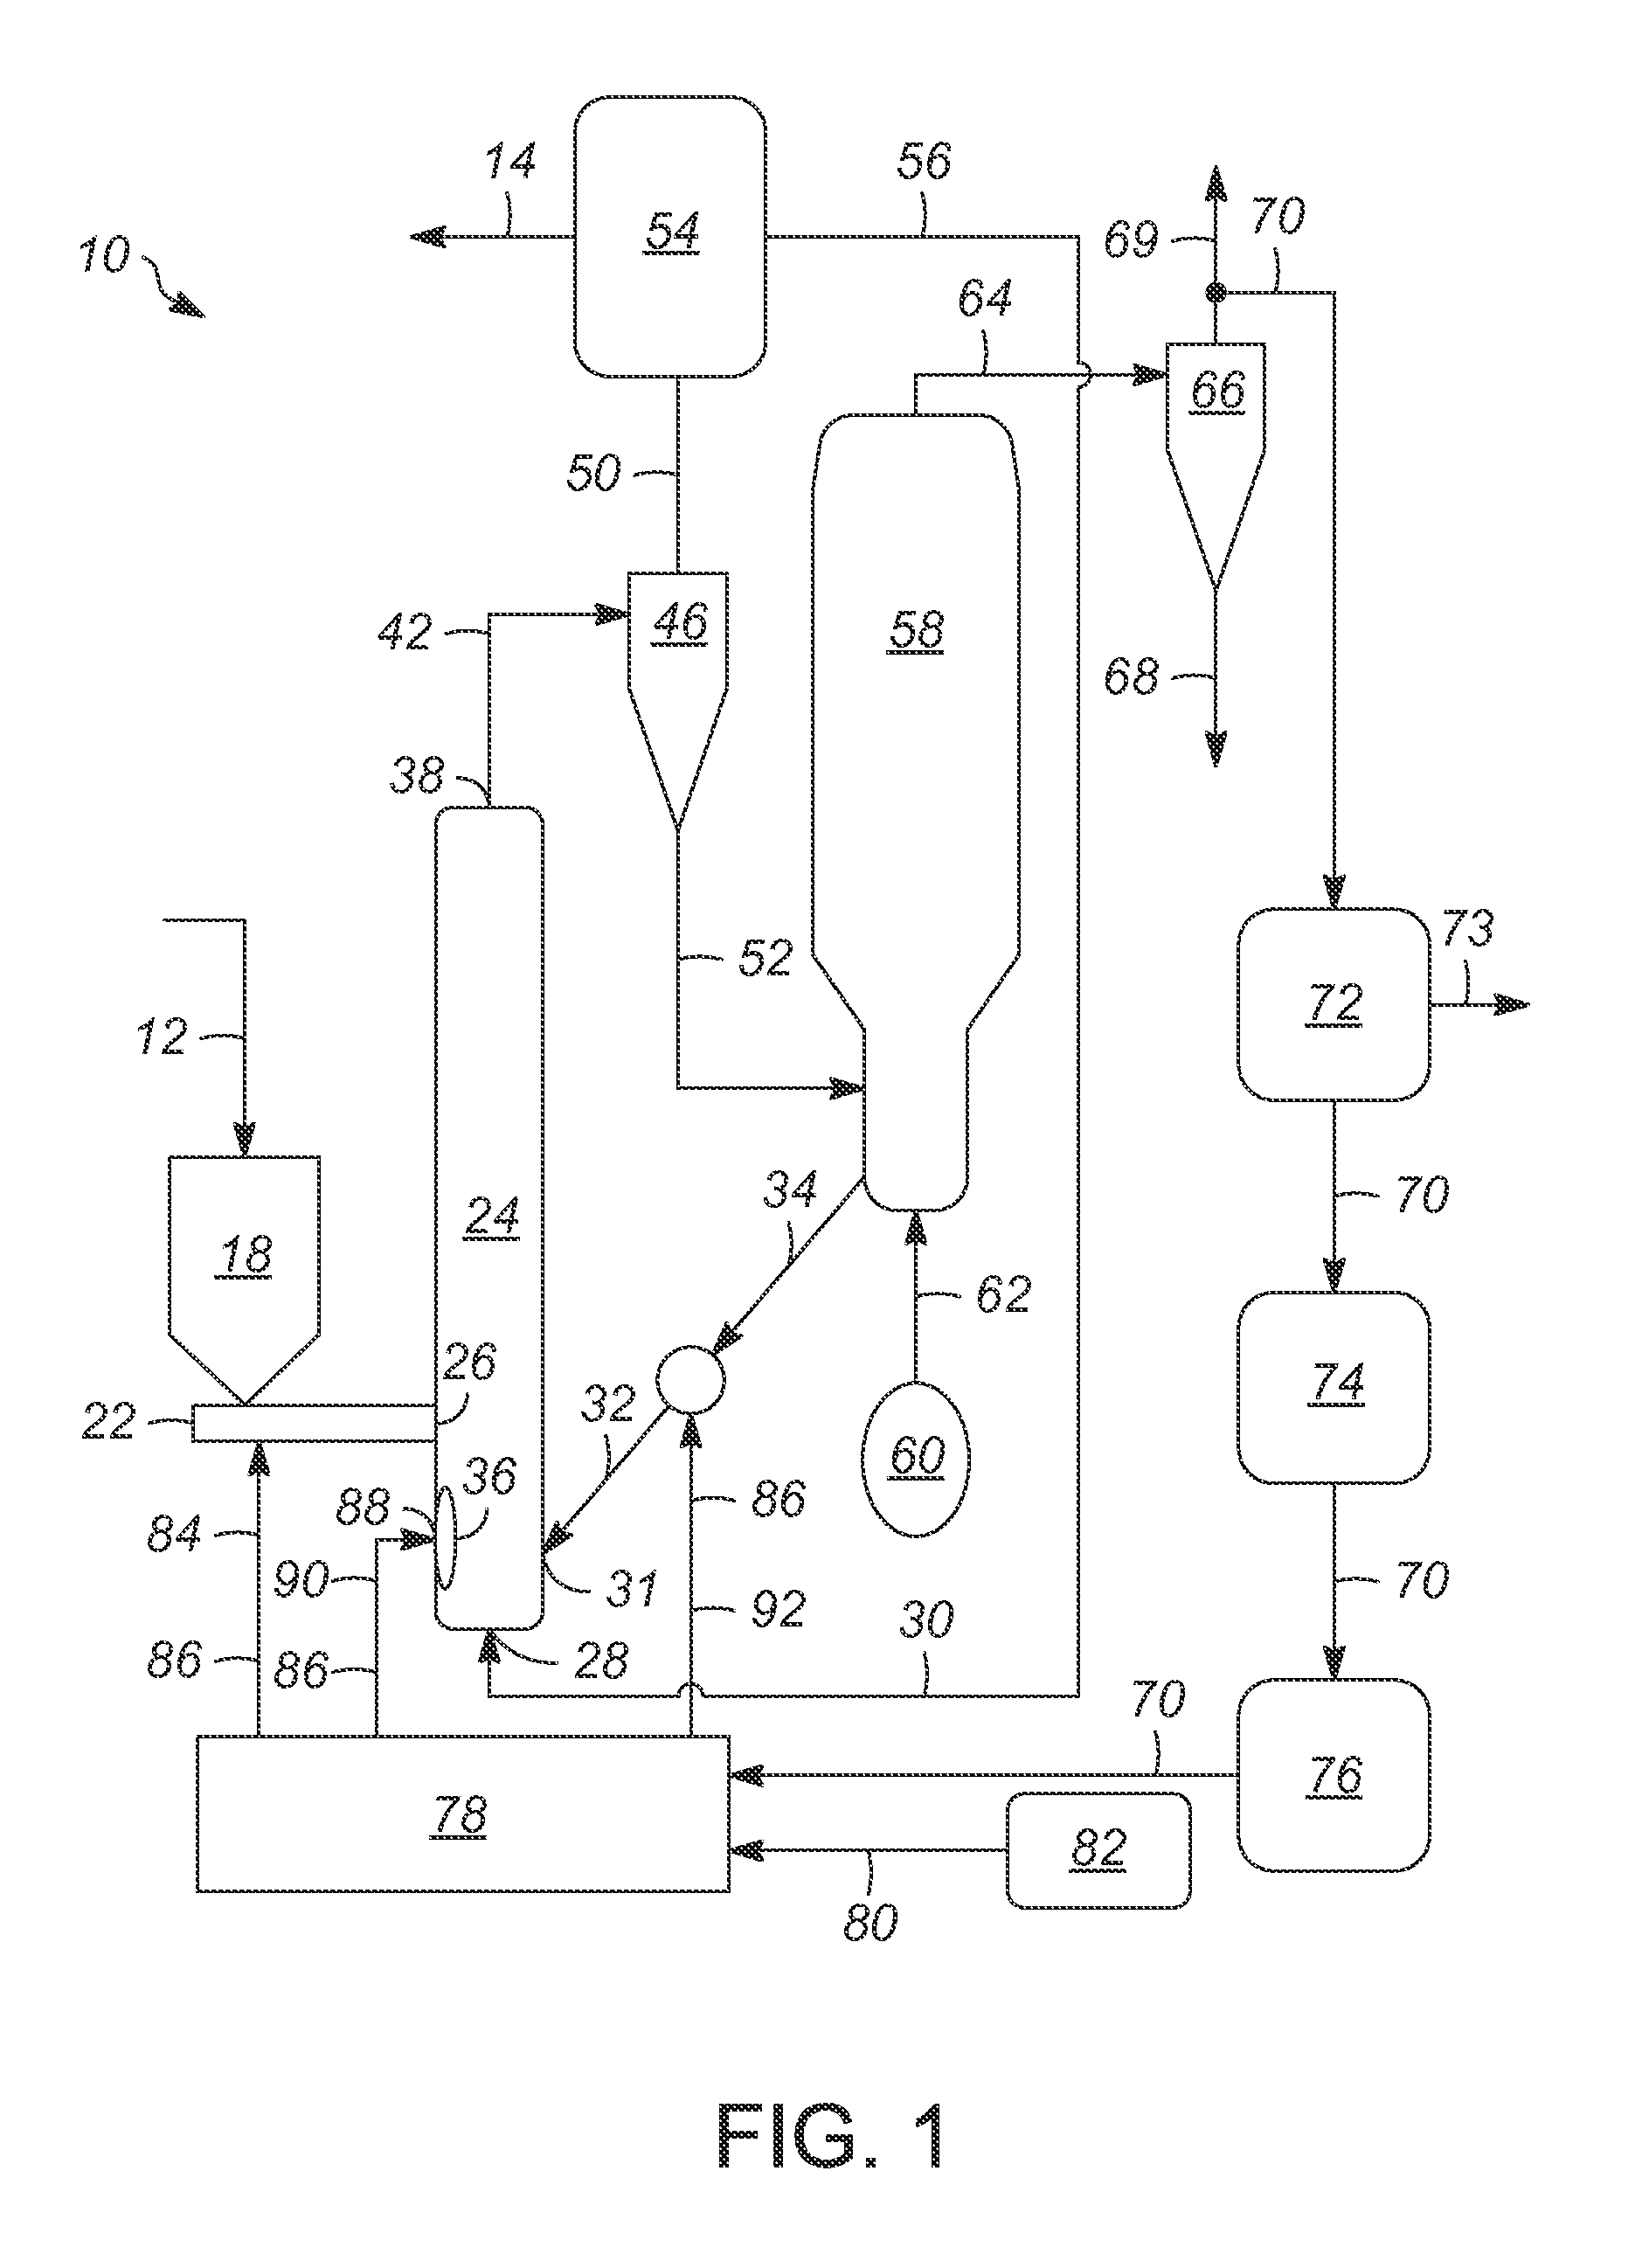 Methods and apparatuses for thermally converting biomass